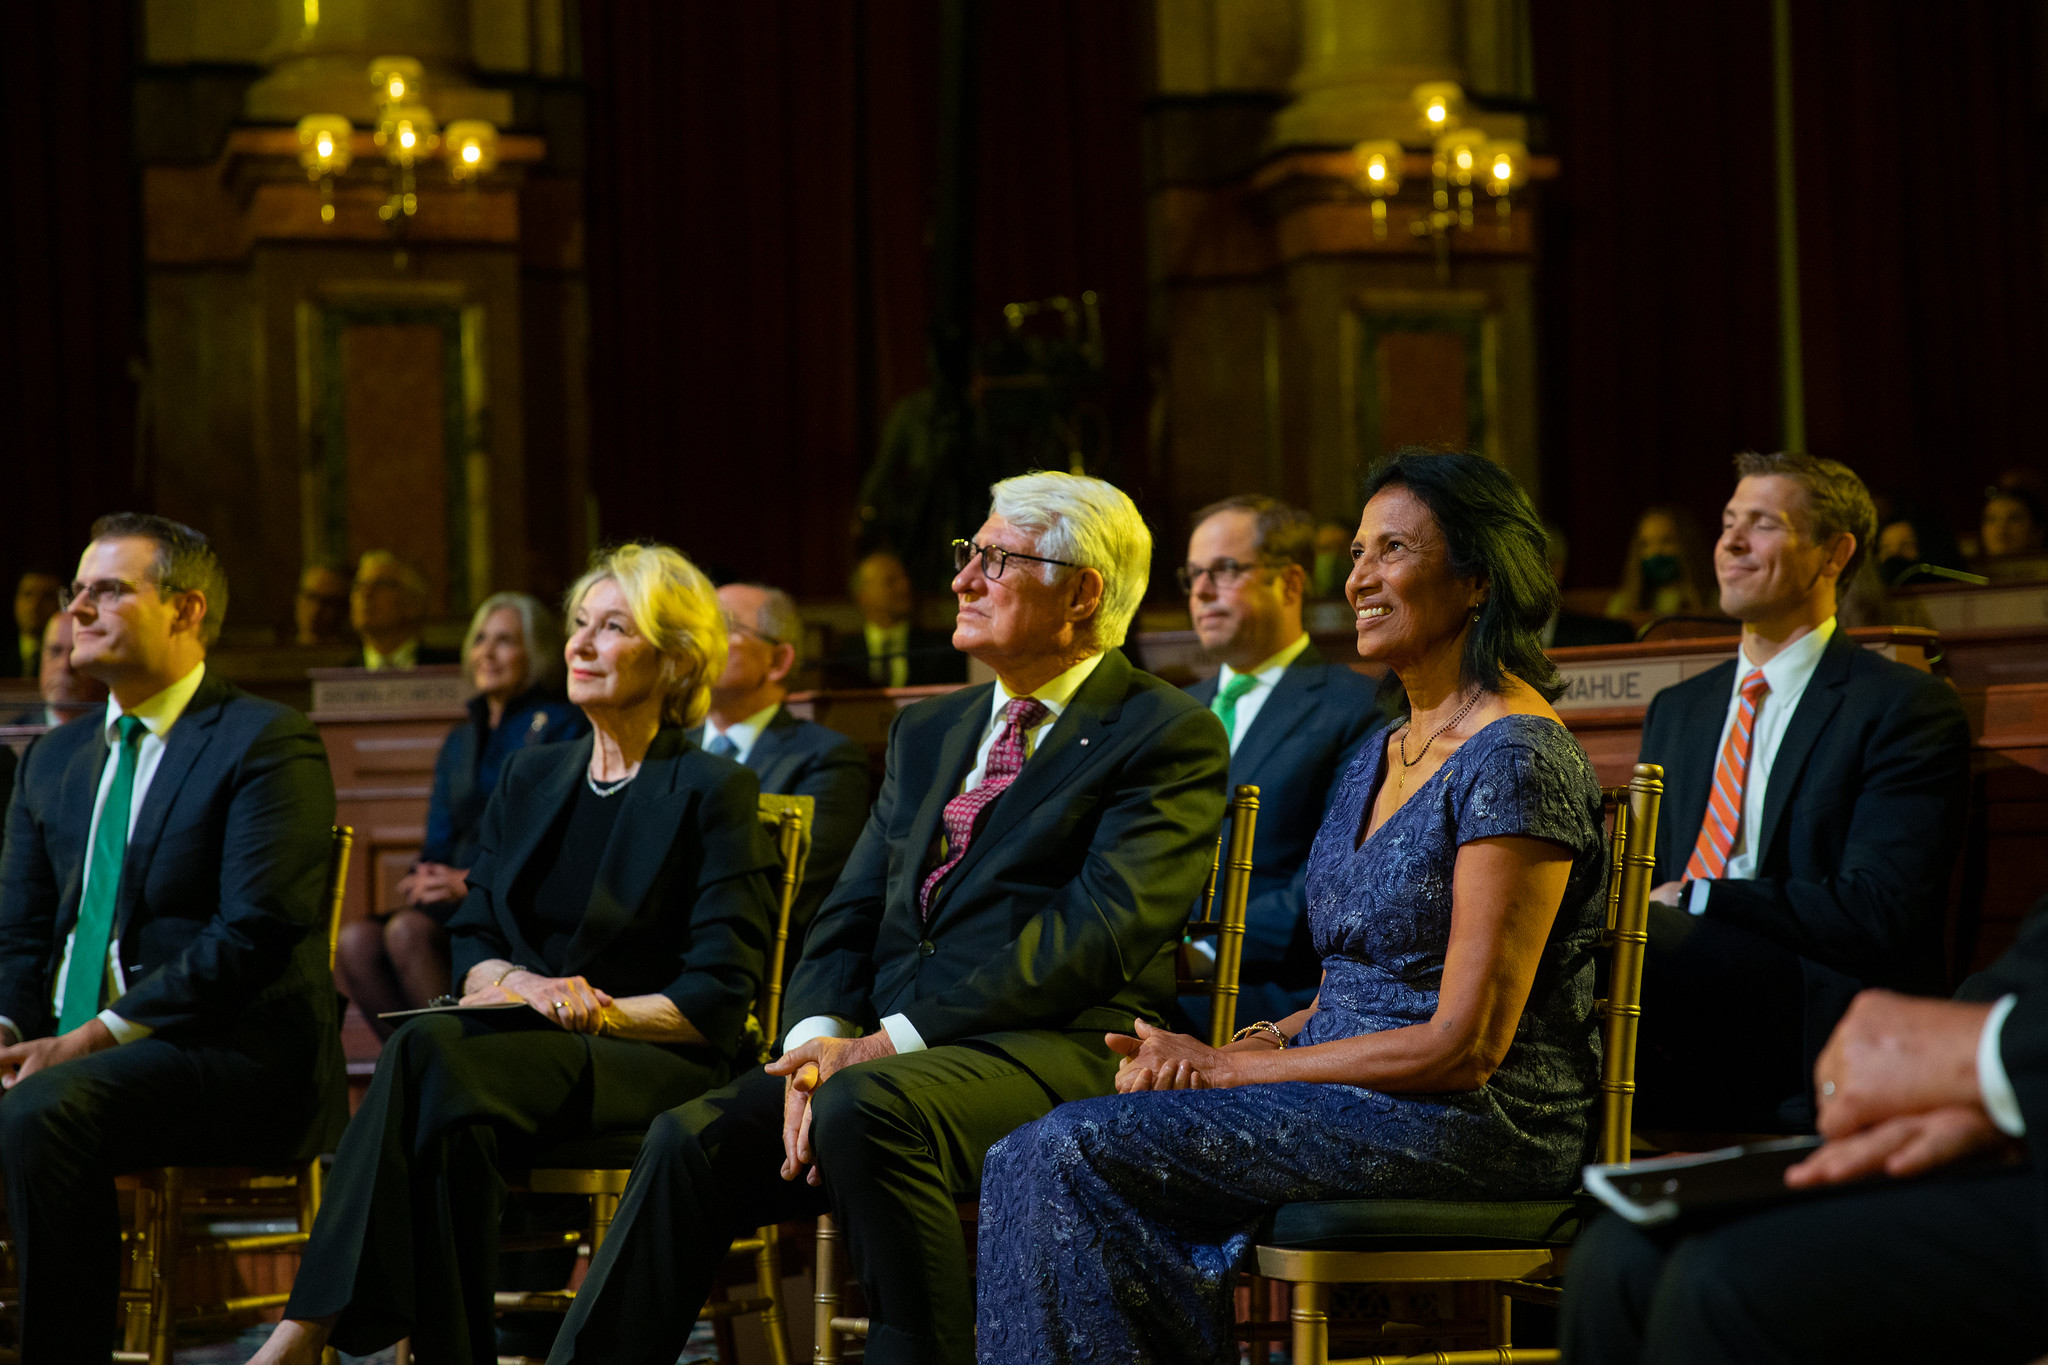 At the Laureate Award Ceremony, Thilsted and her husband Finn were seated with the Ruan family who has been the pillar of support for the World Food Prize Foundation. Photo by World Food Prize Foundation.